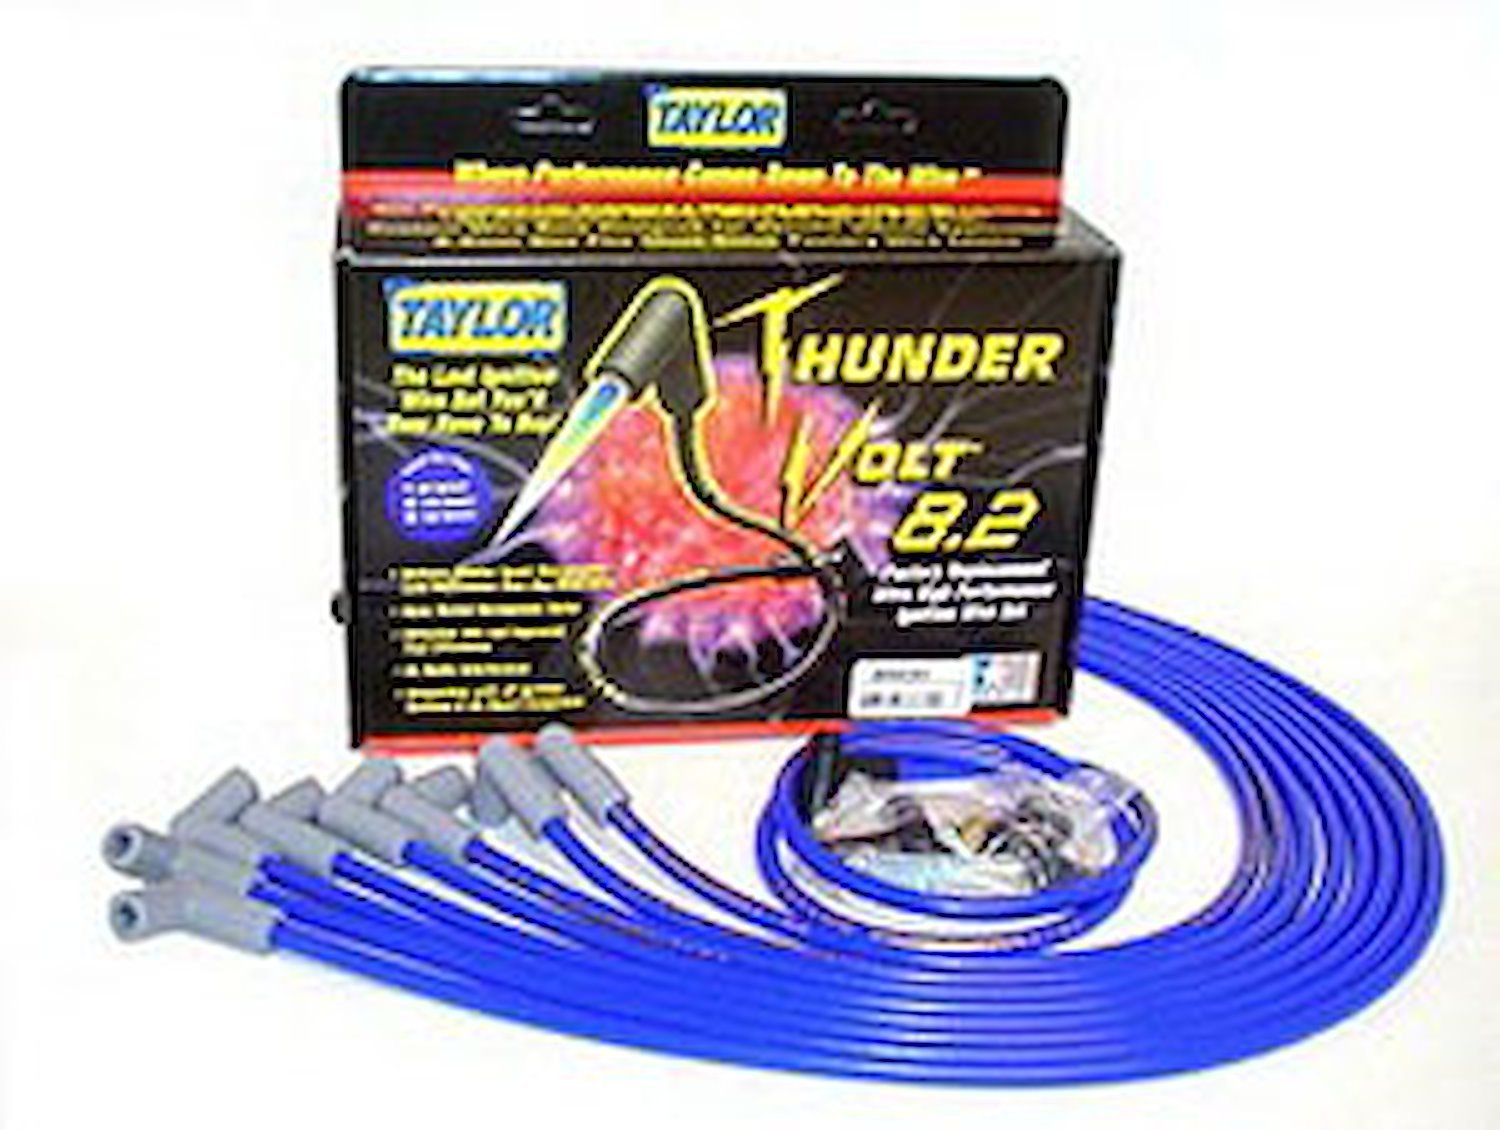 ThunderVolt 8.2mm Spark Plug Wires Small Block Chevy (Under Headers)